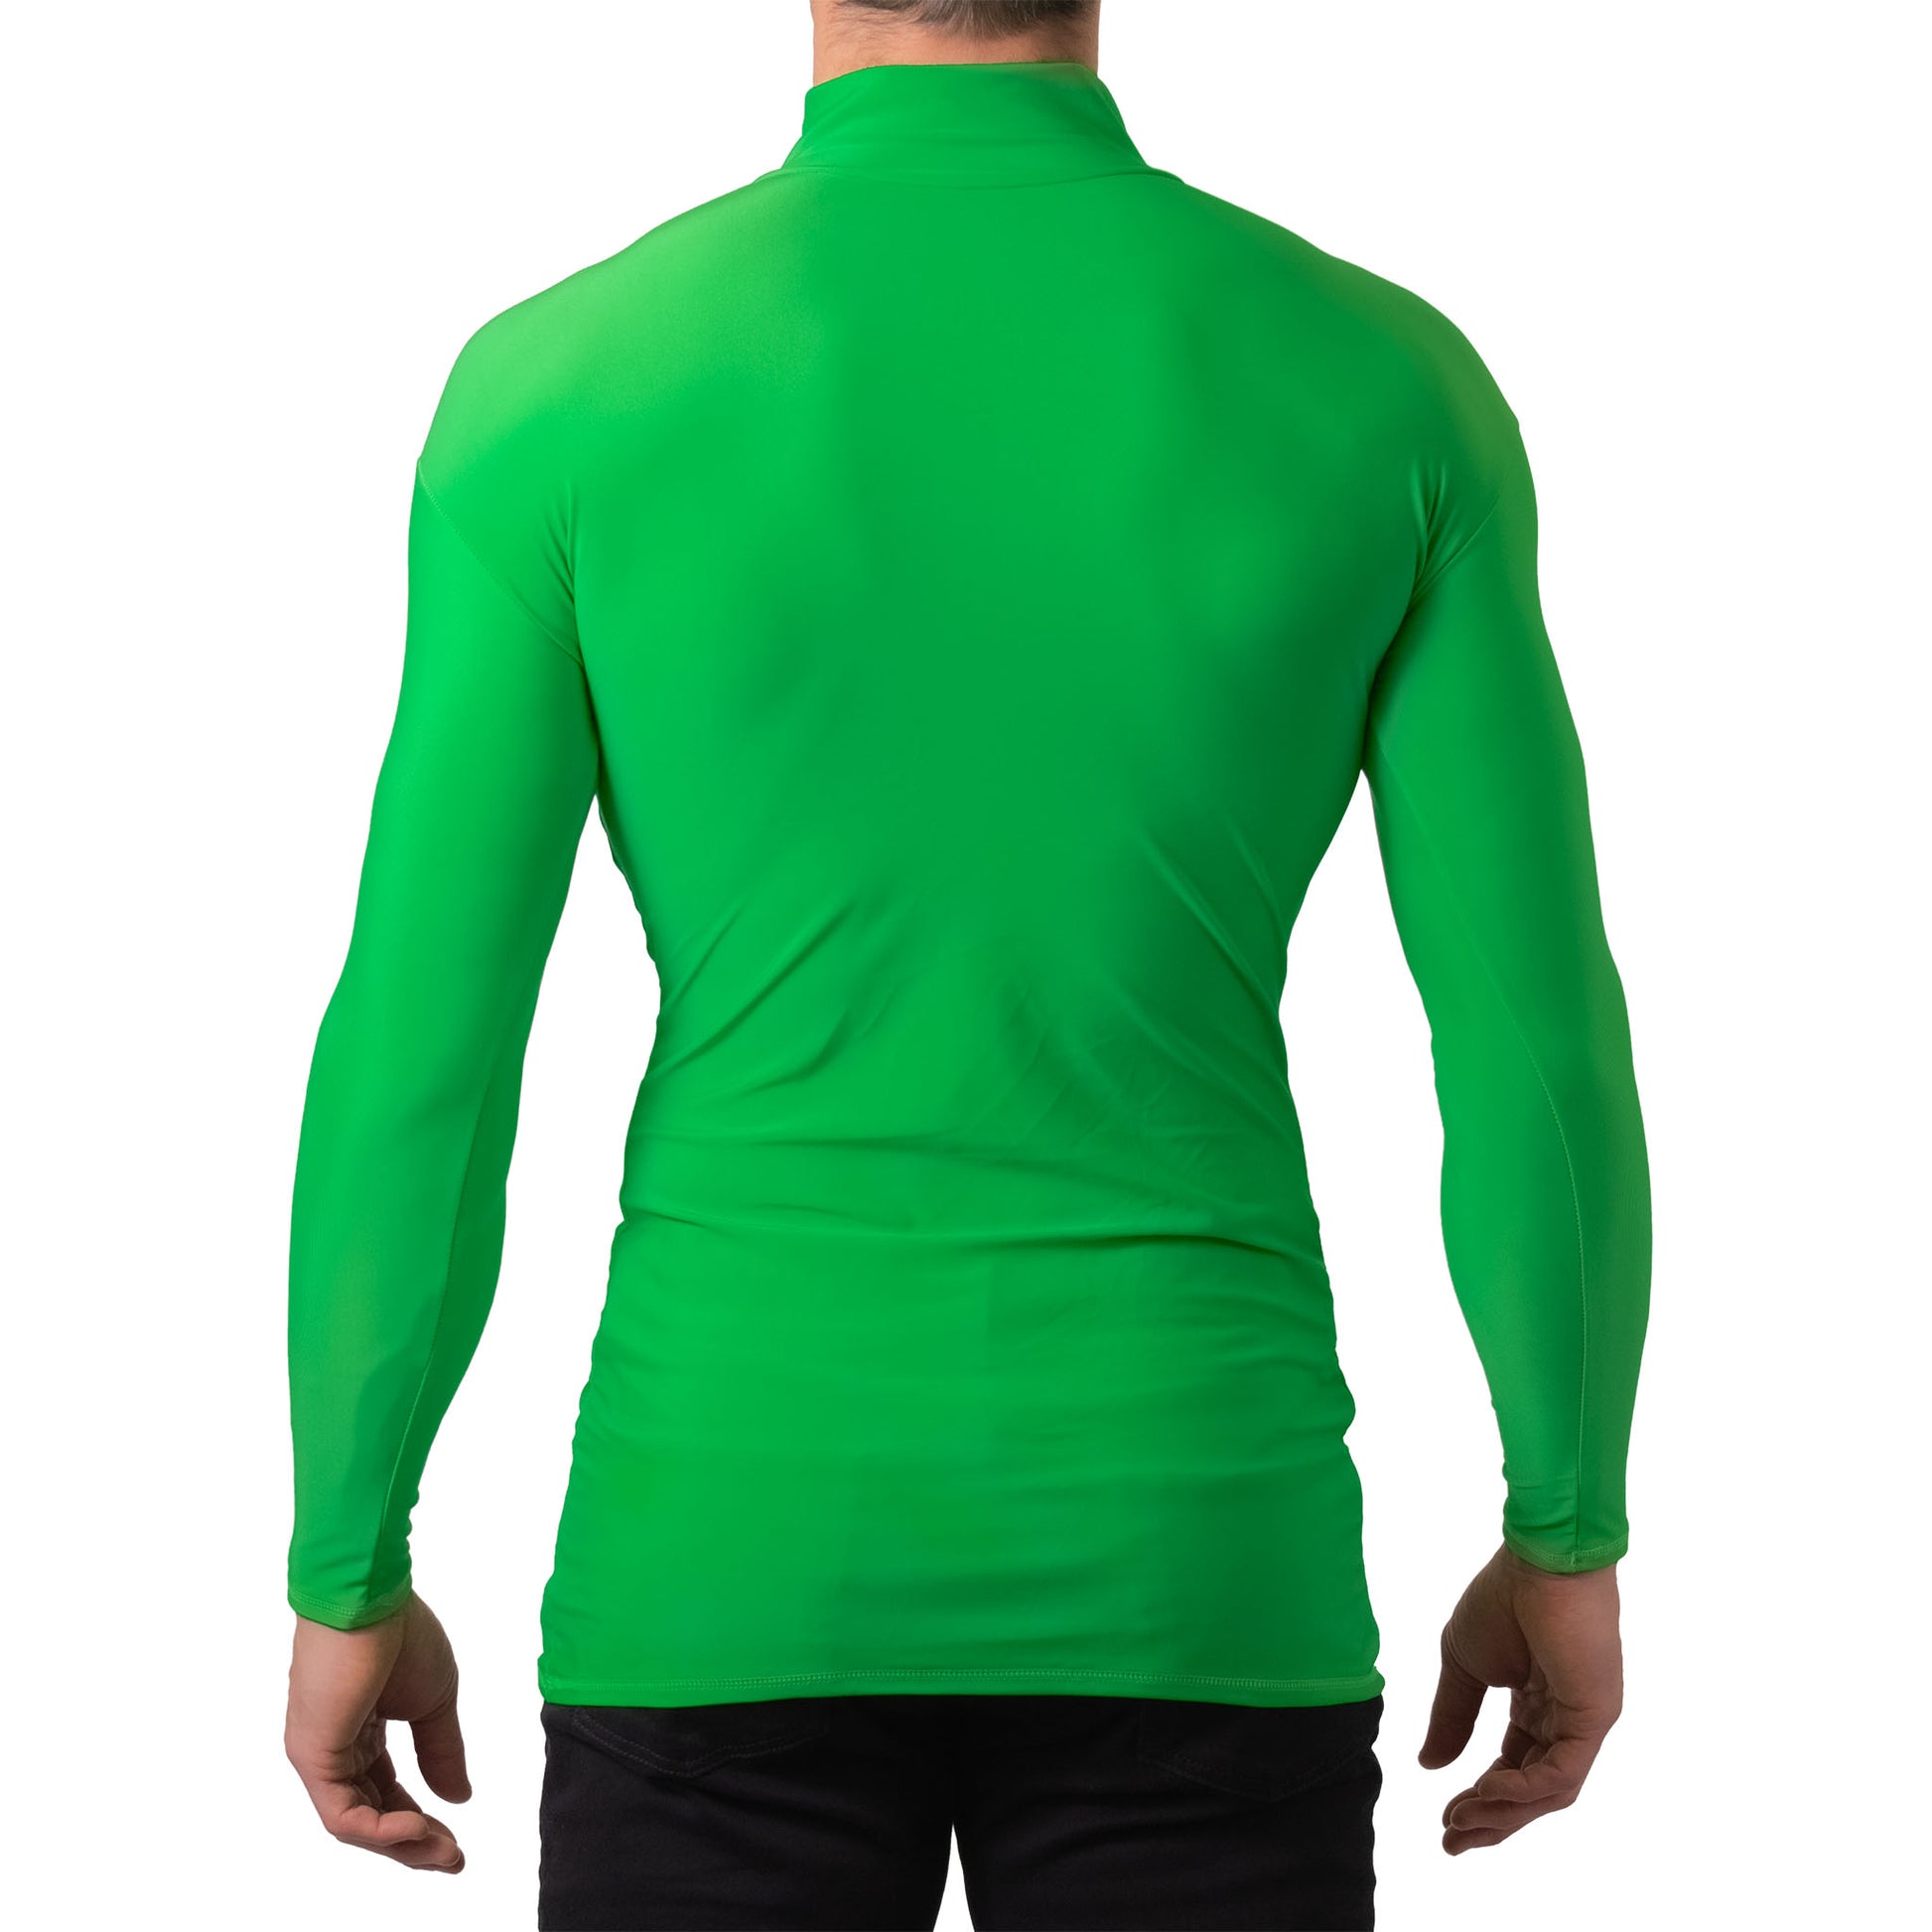  Green Screen Design Projection Chroma Key Photo Video Stream  Long Sleeve T-Shirt : Clothing, Shoes & Jewelry